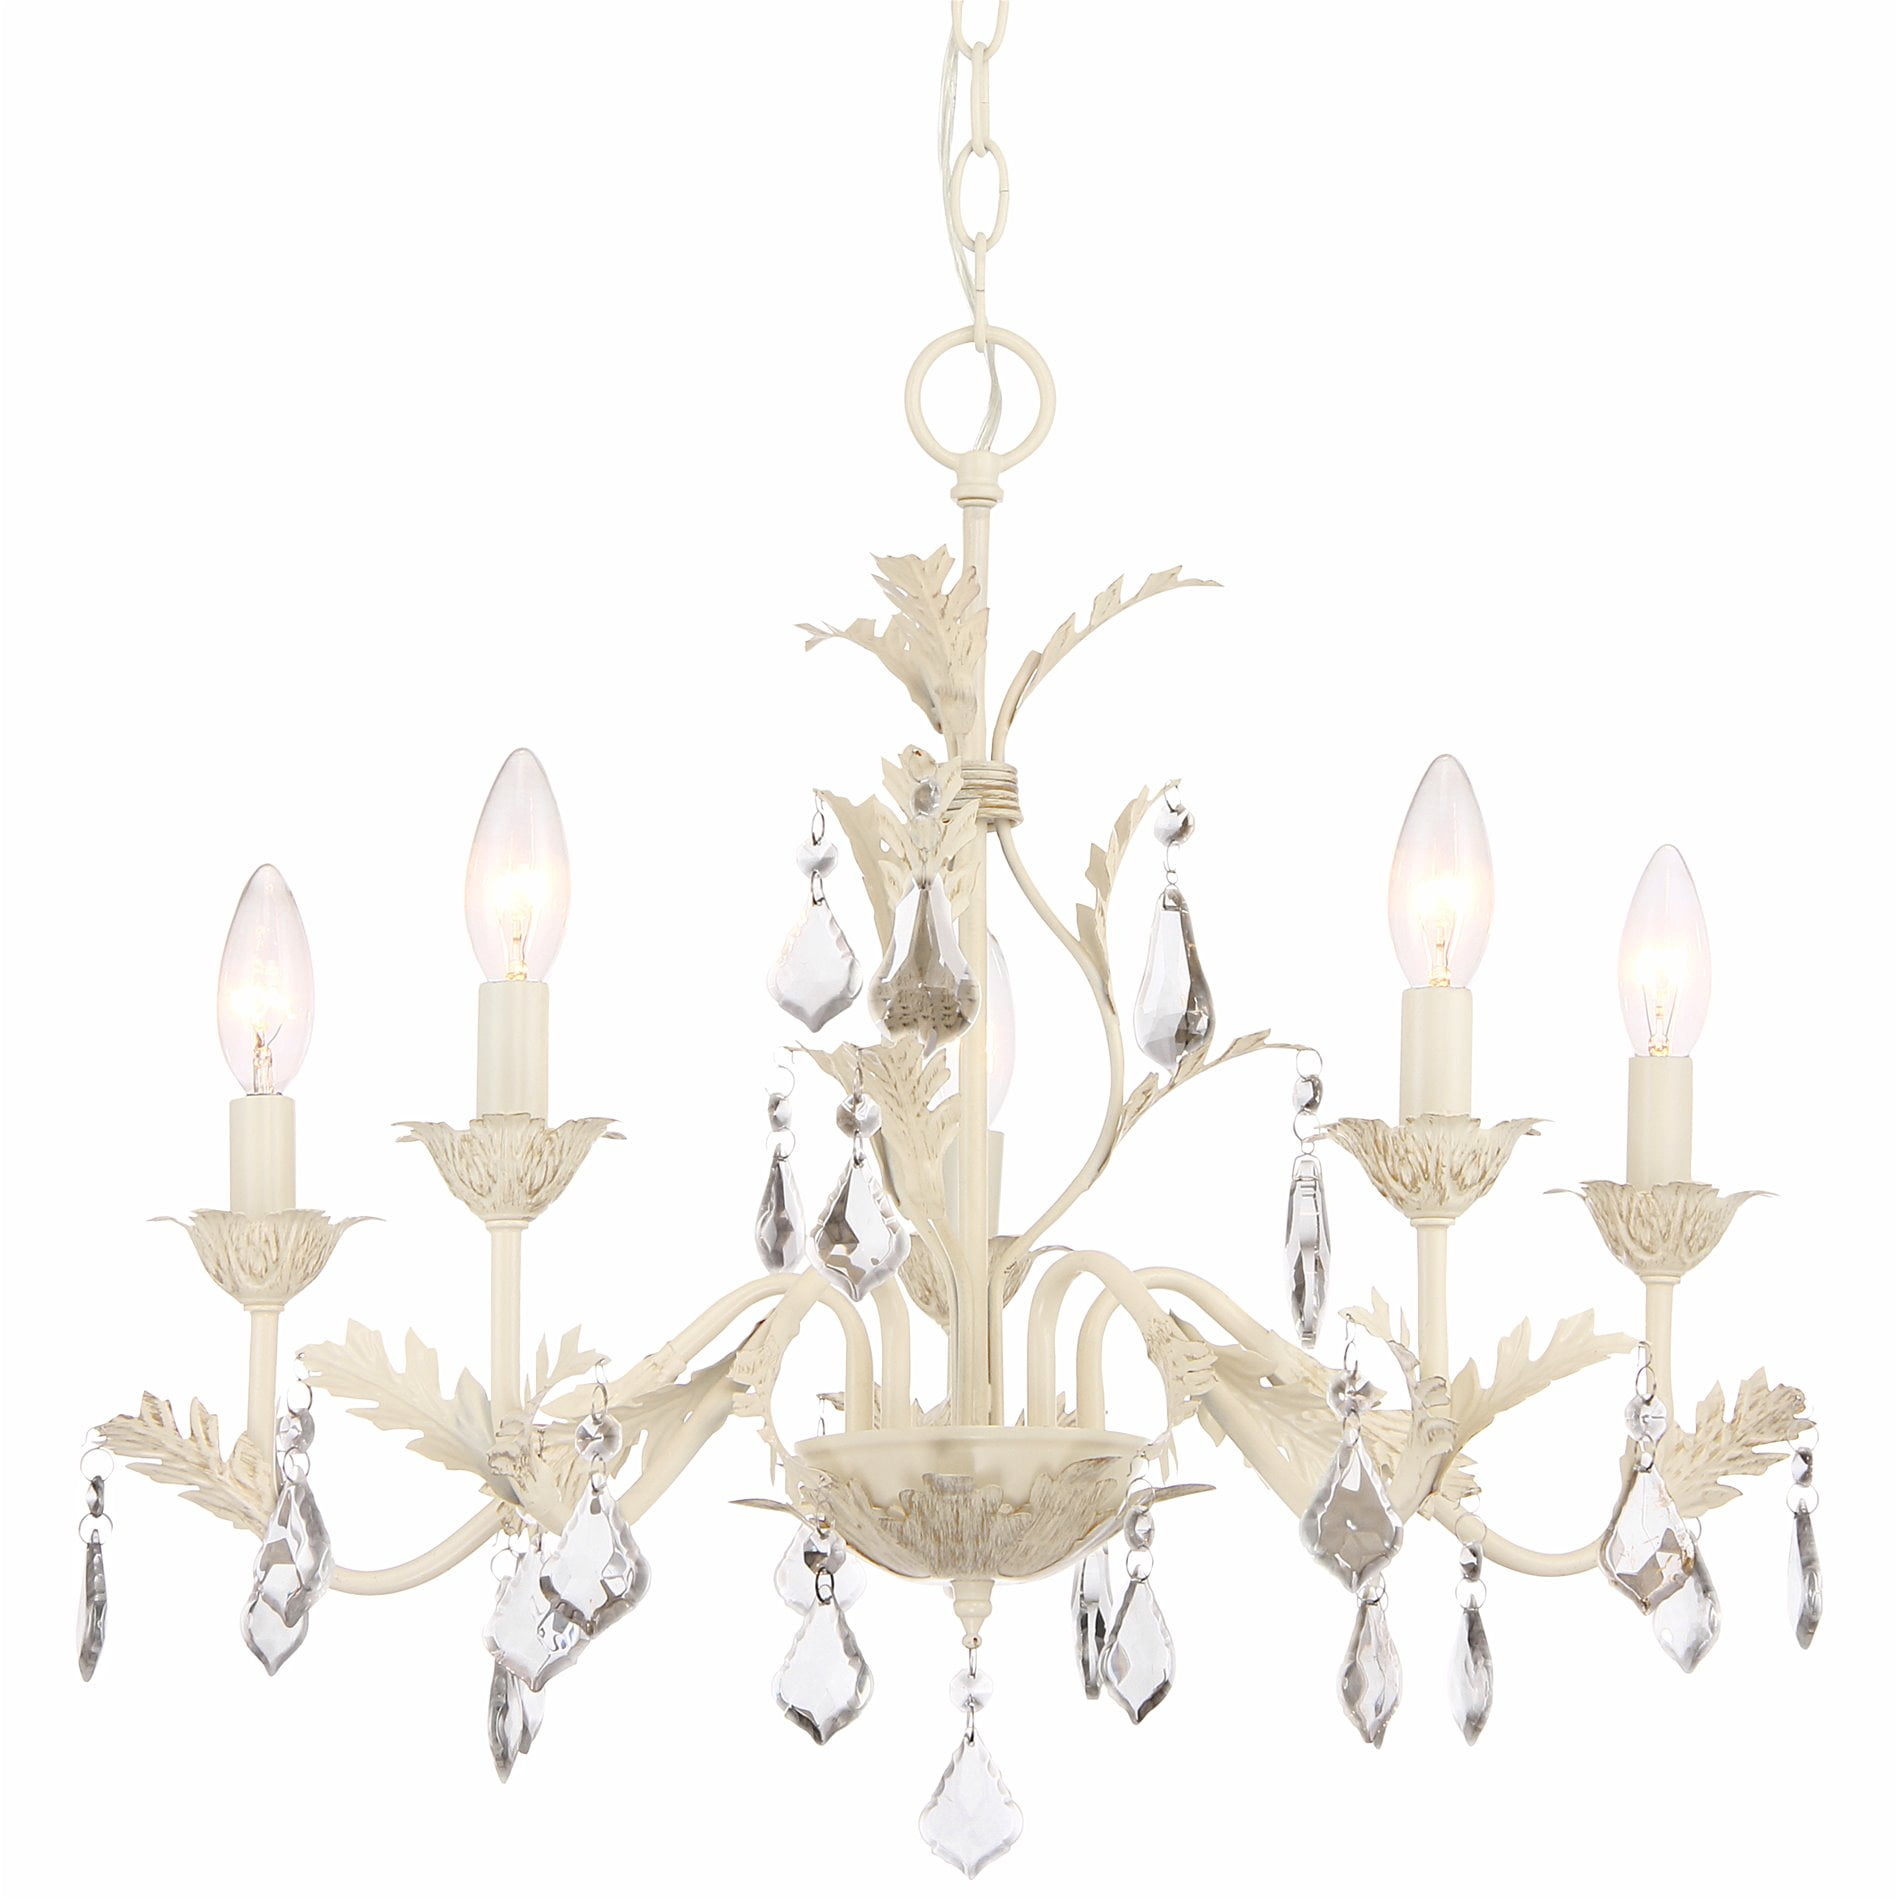 Kira Home Astoria 21" French Country Chandelier Leaf Design Hanging Crysta... 